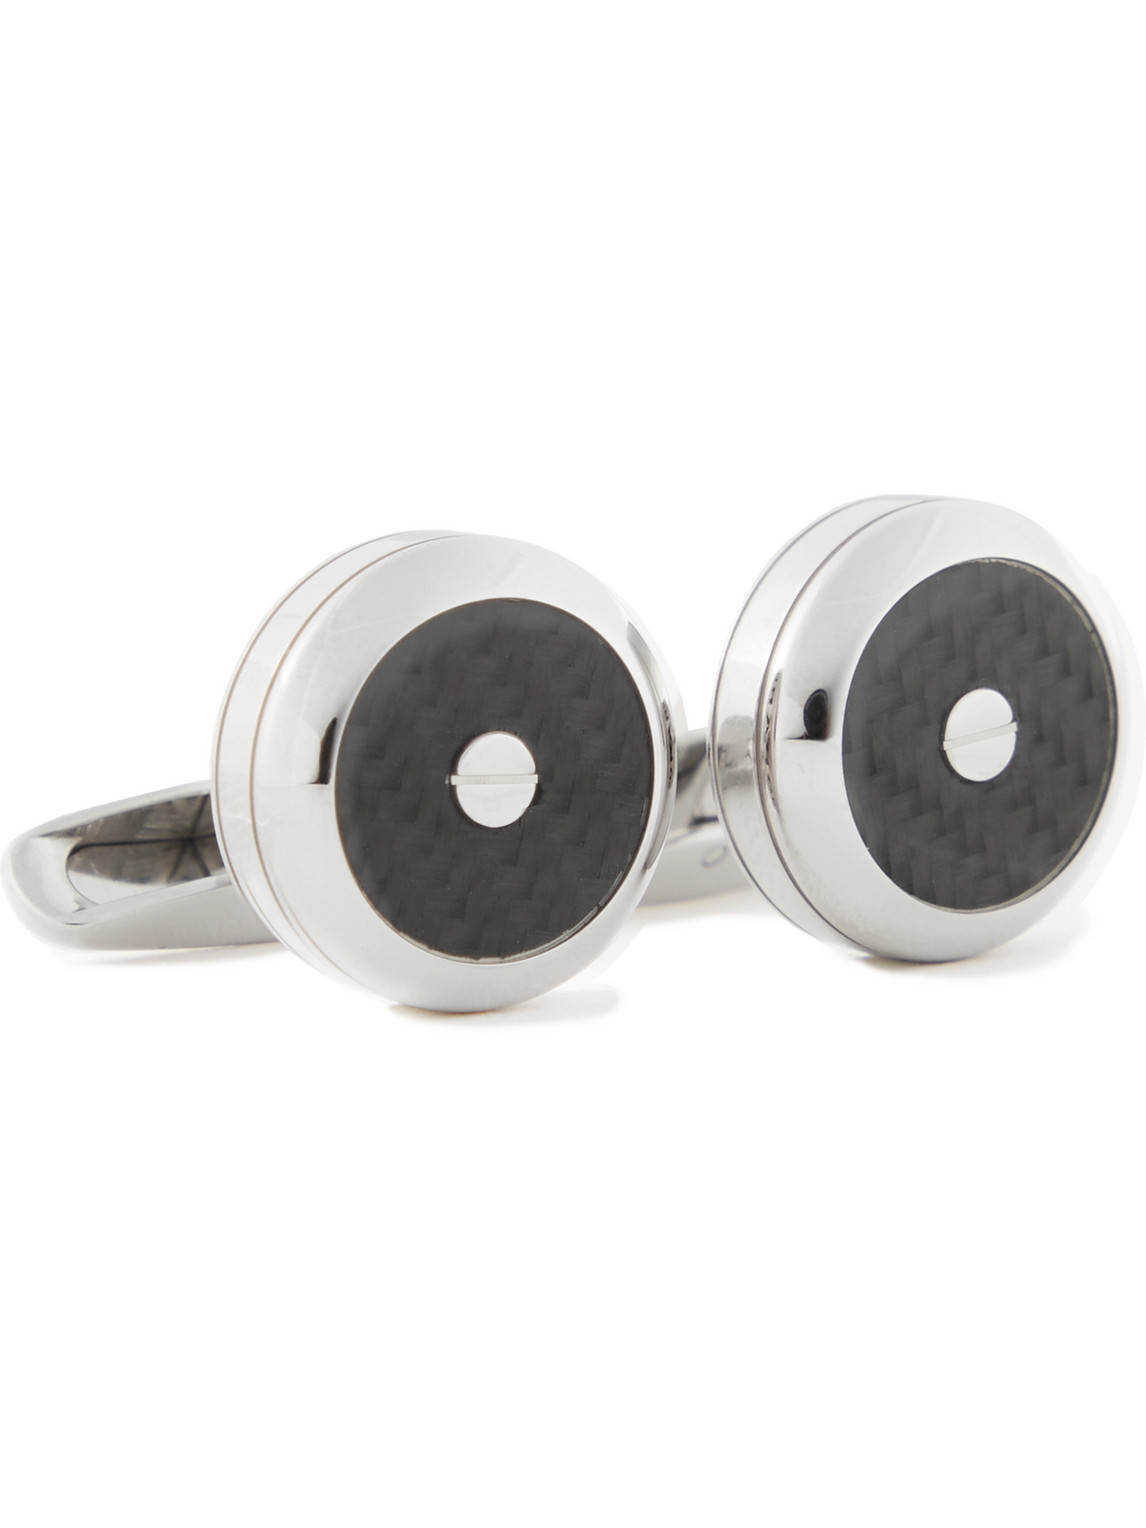 Chopard Classic Racing Engraved Stainless Steel And Carbon Fibre Cufflinks In Silver